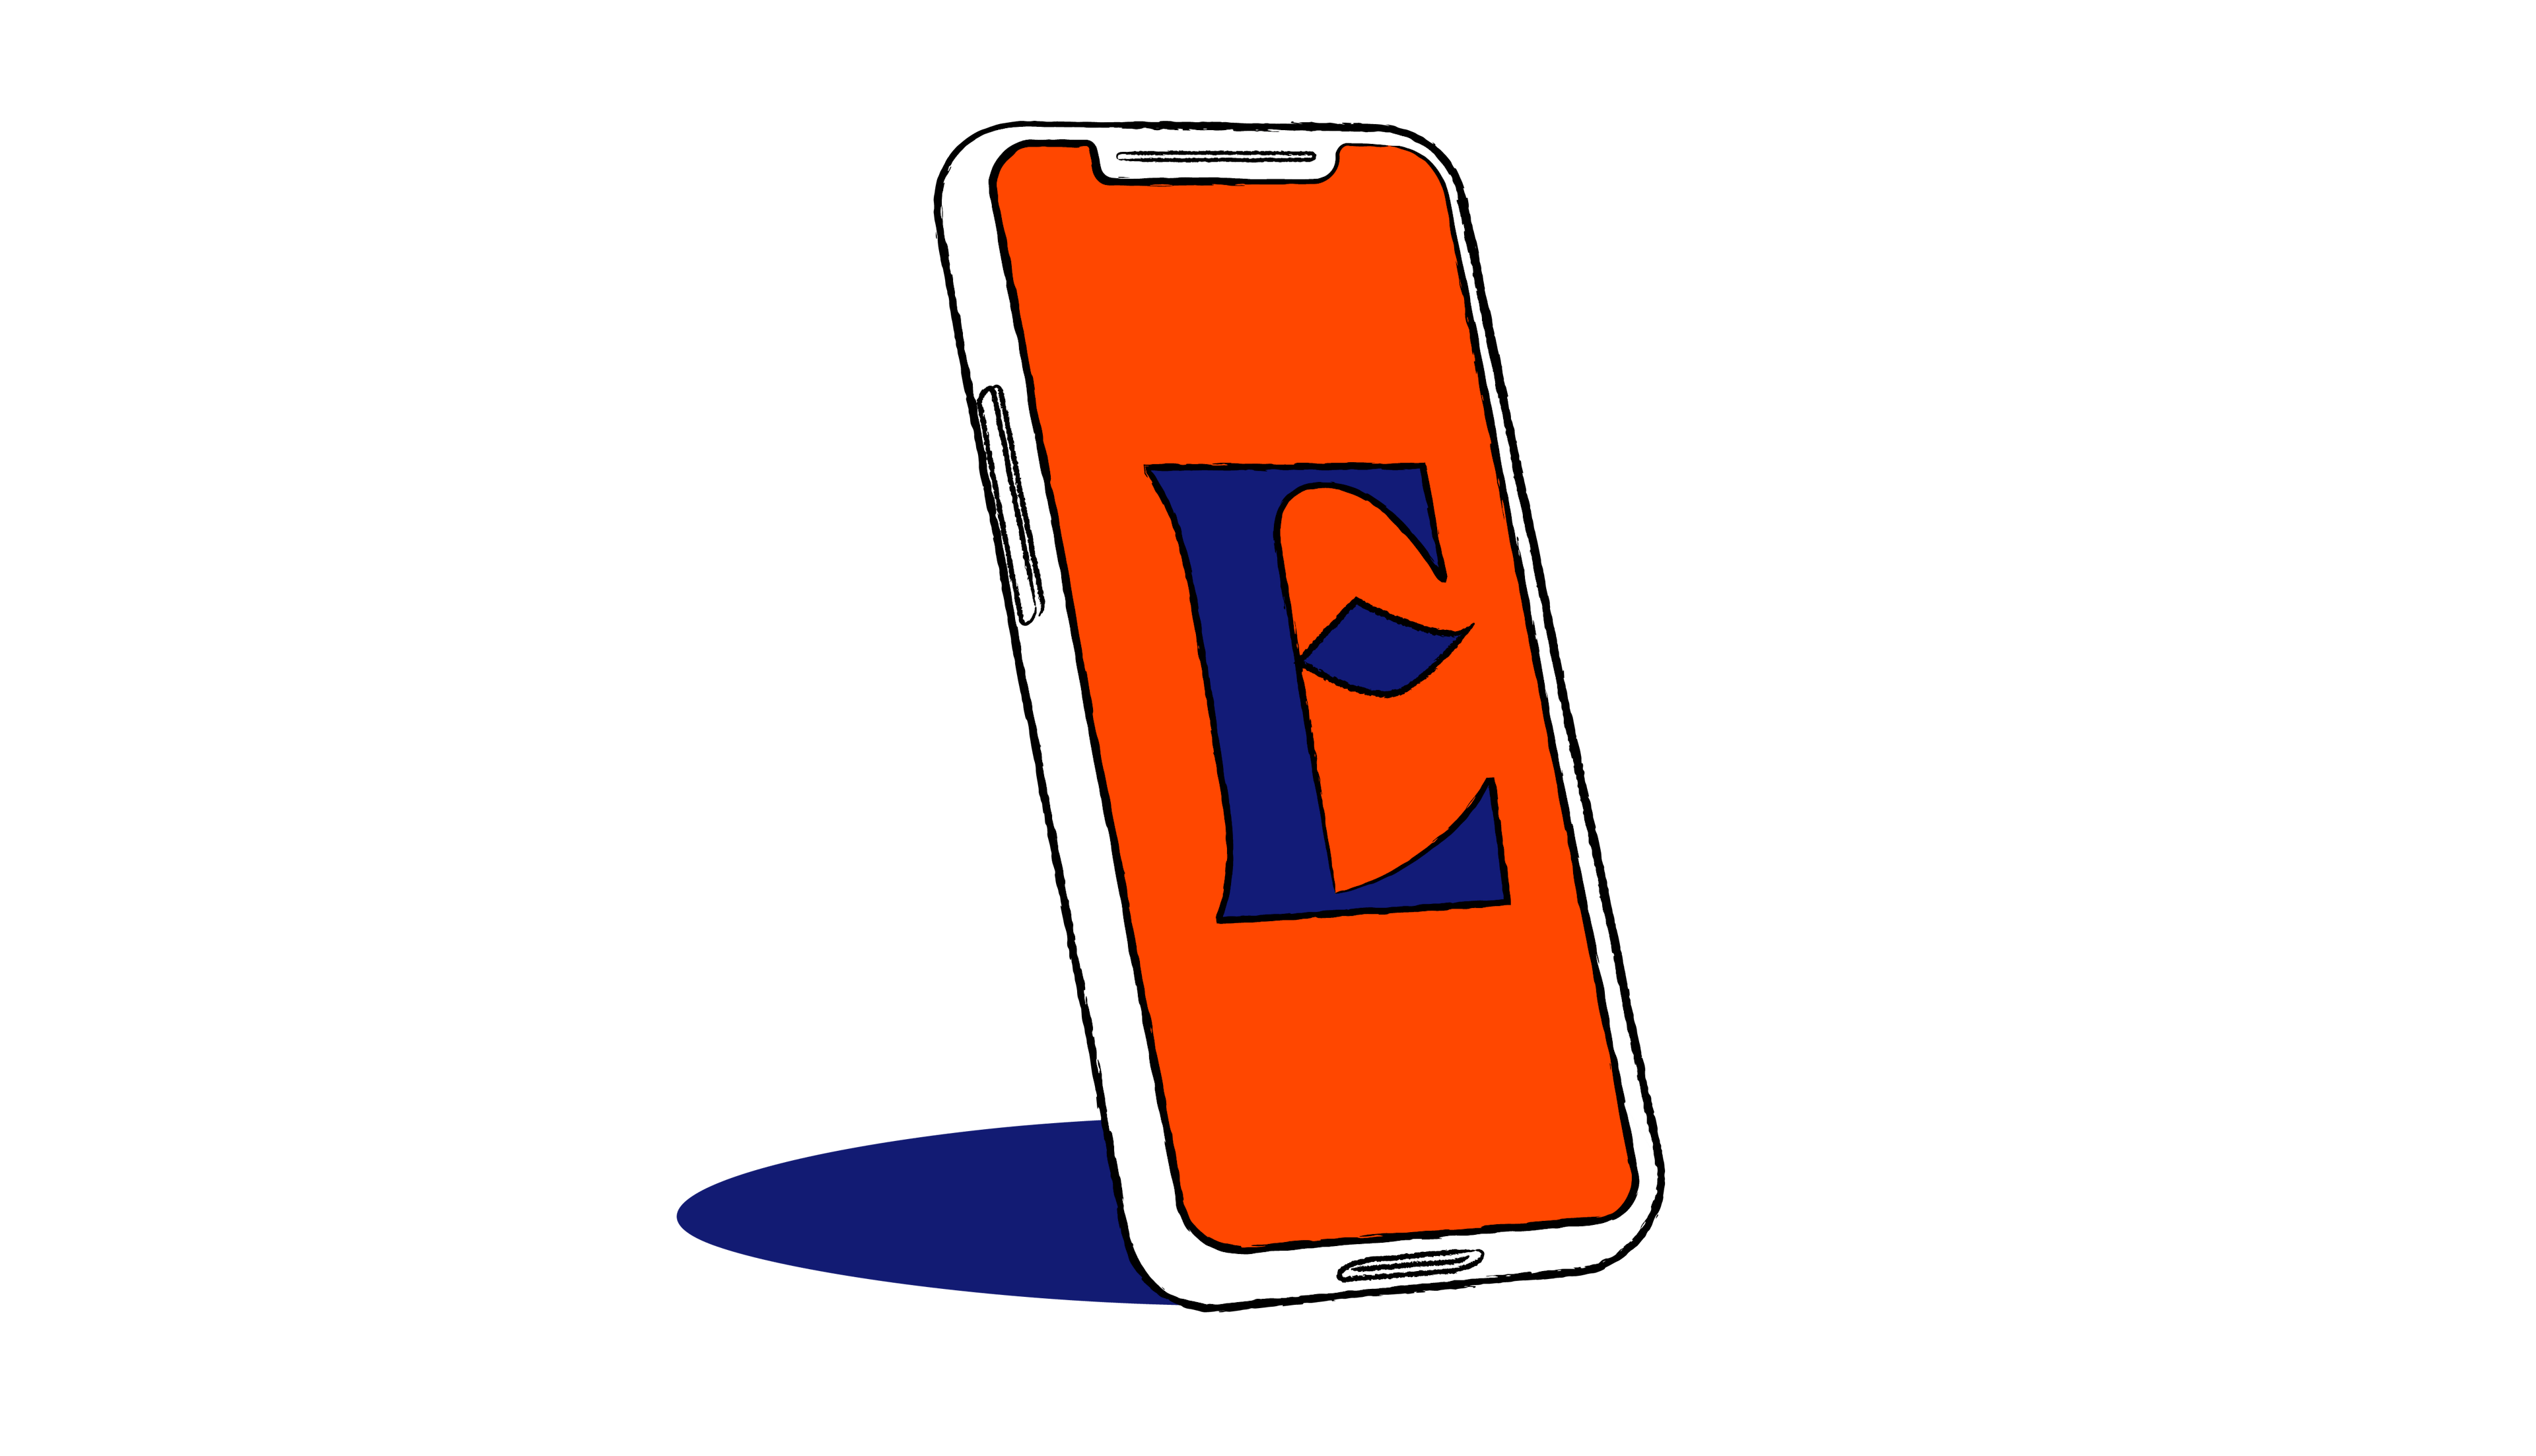 Phone with the Everly logo